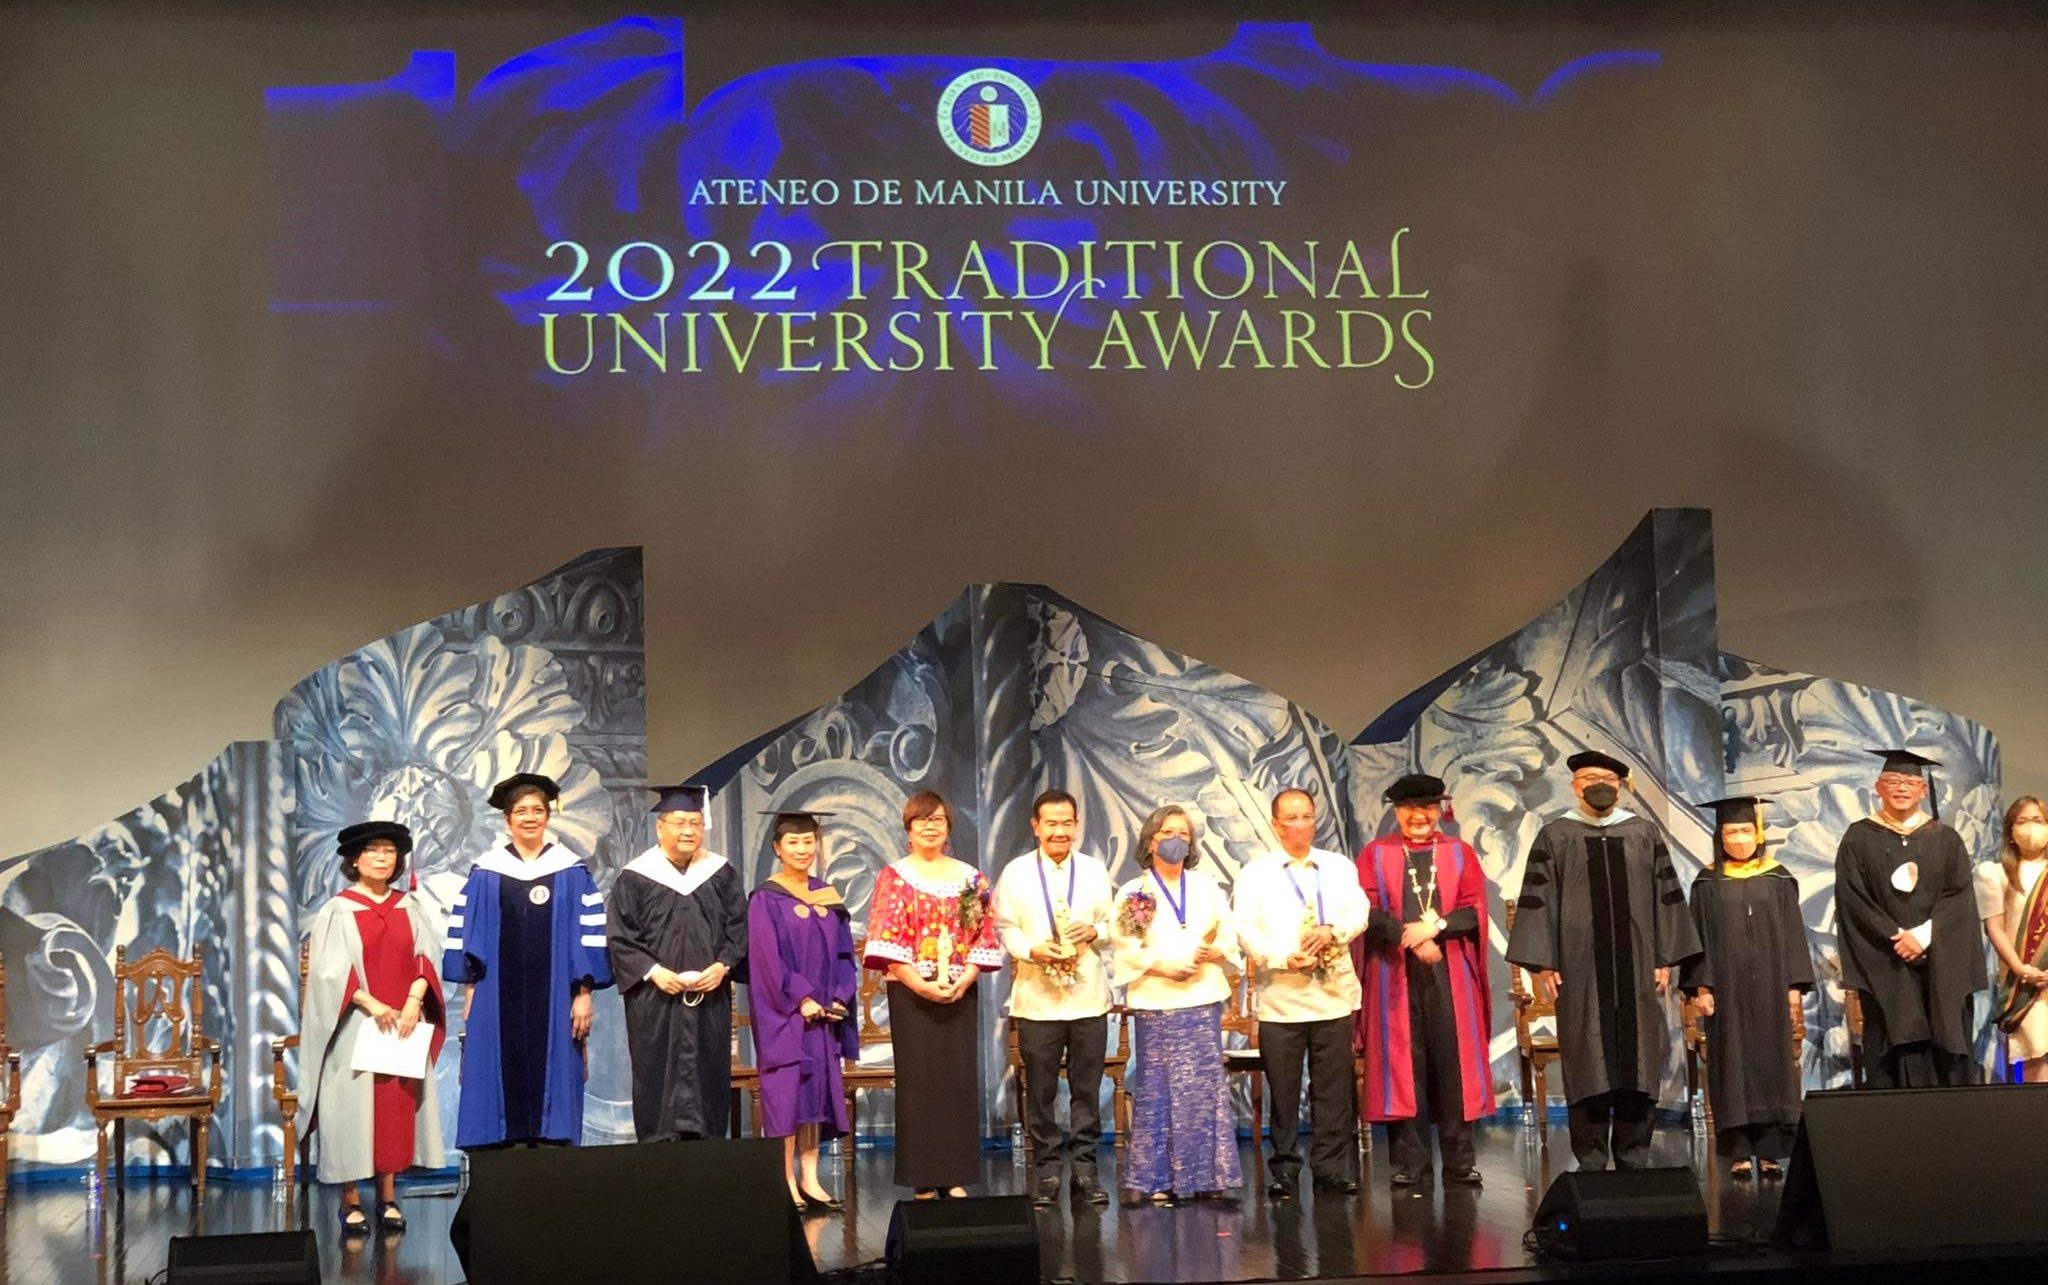 Millie Kilayko (5th from left), president of the Negrense Volunteers for Change (NVC), receives the award at Ateneo de Manila University